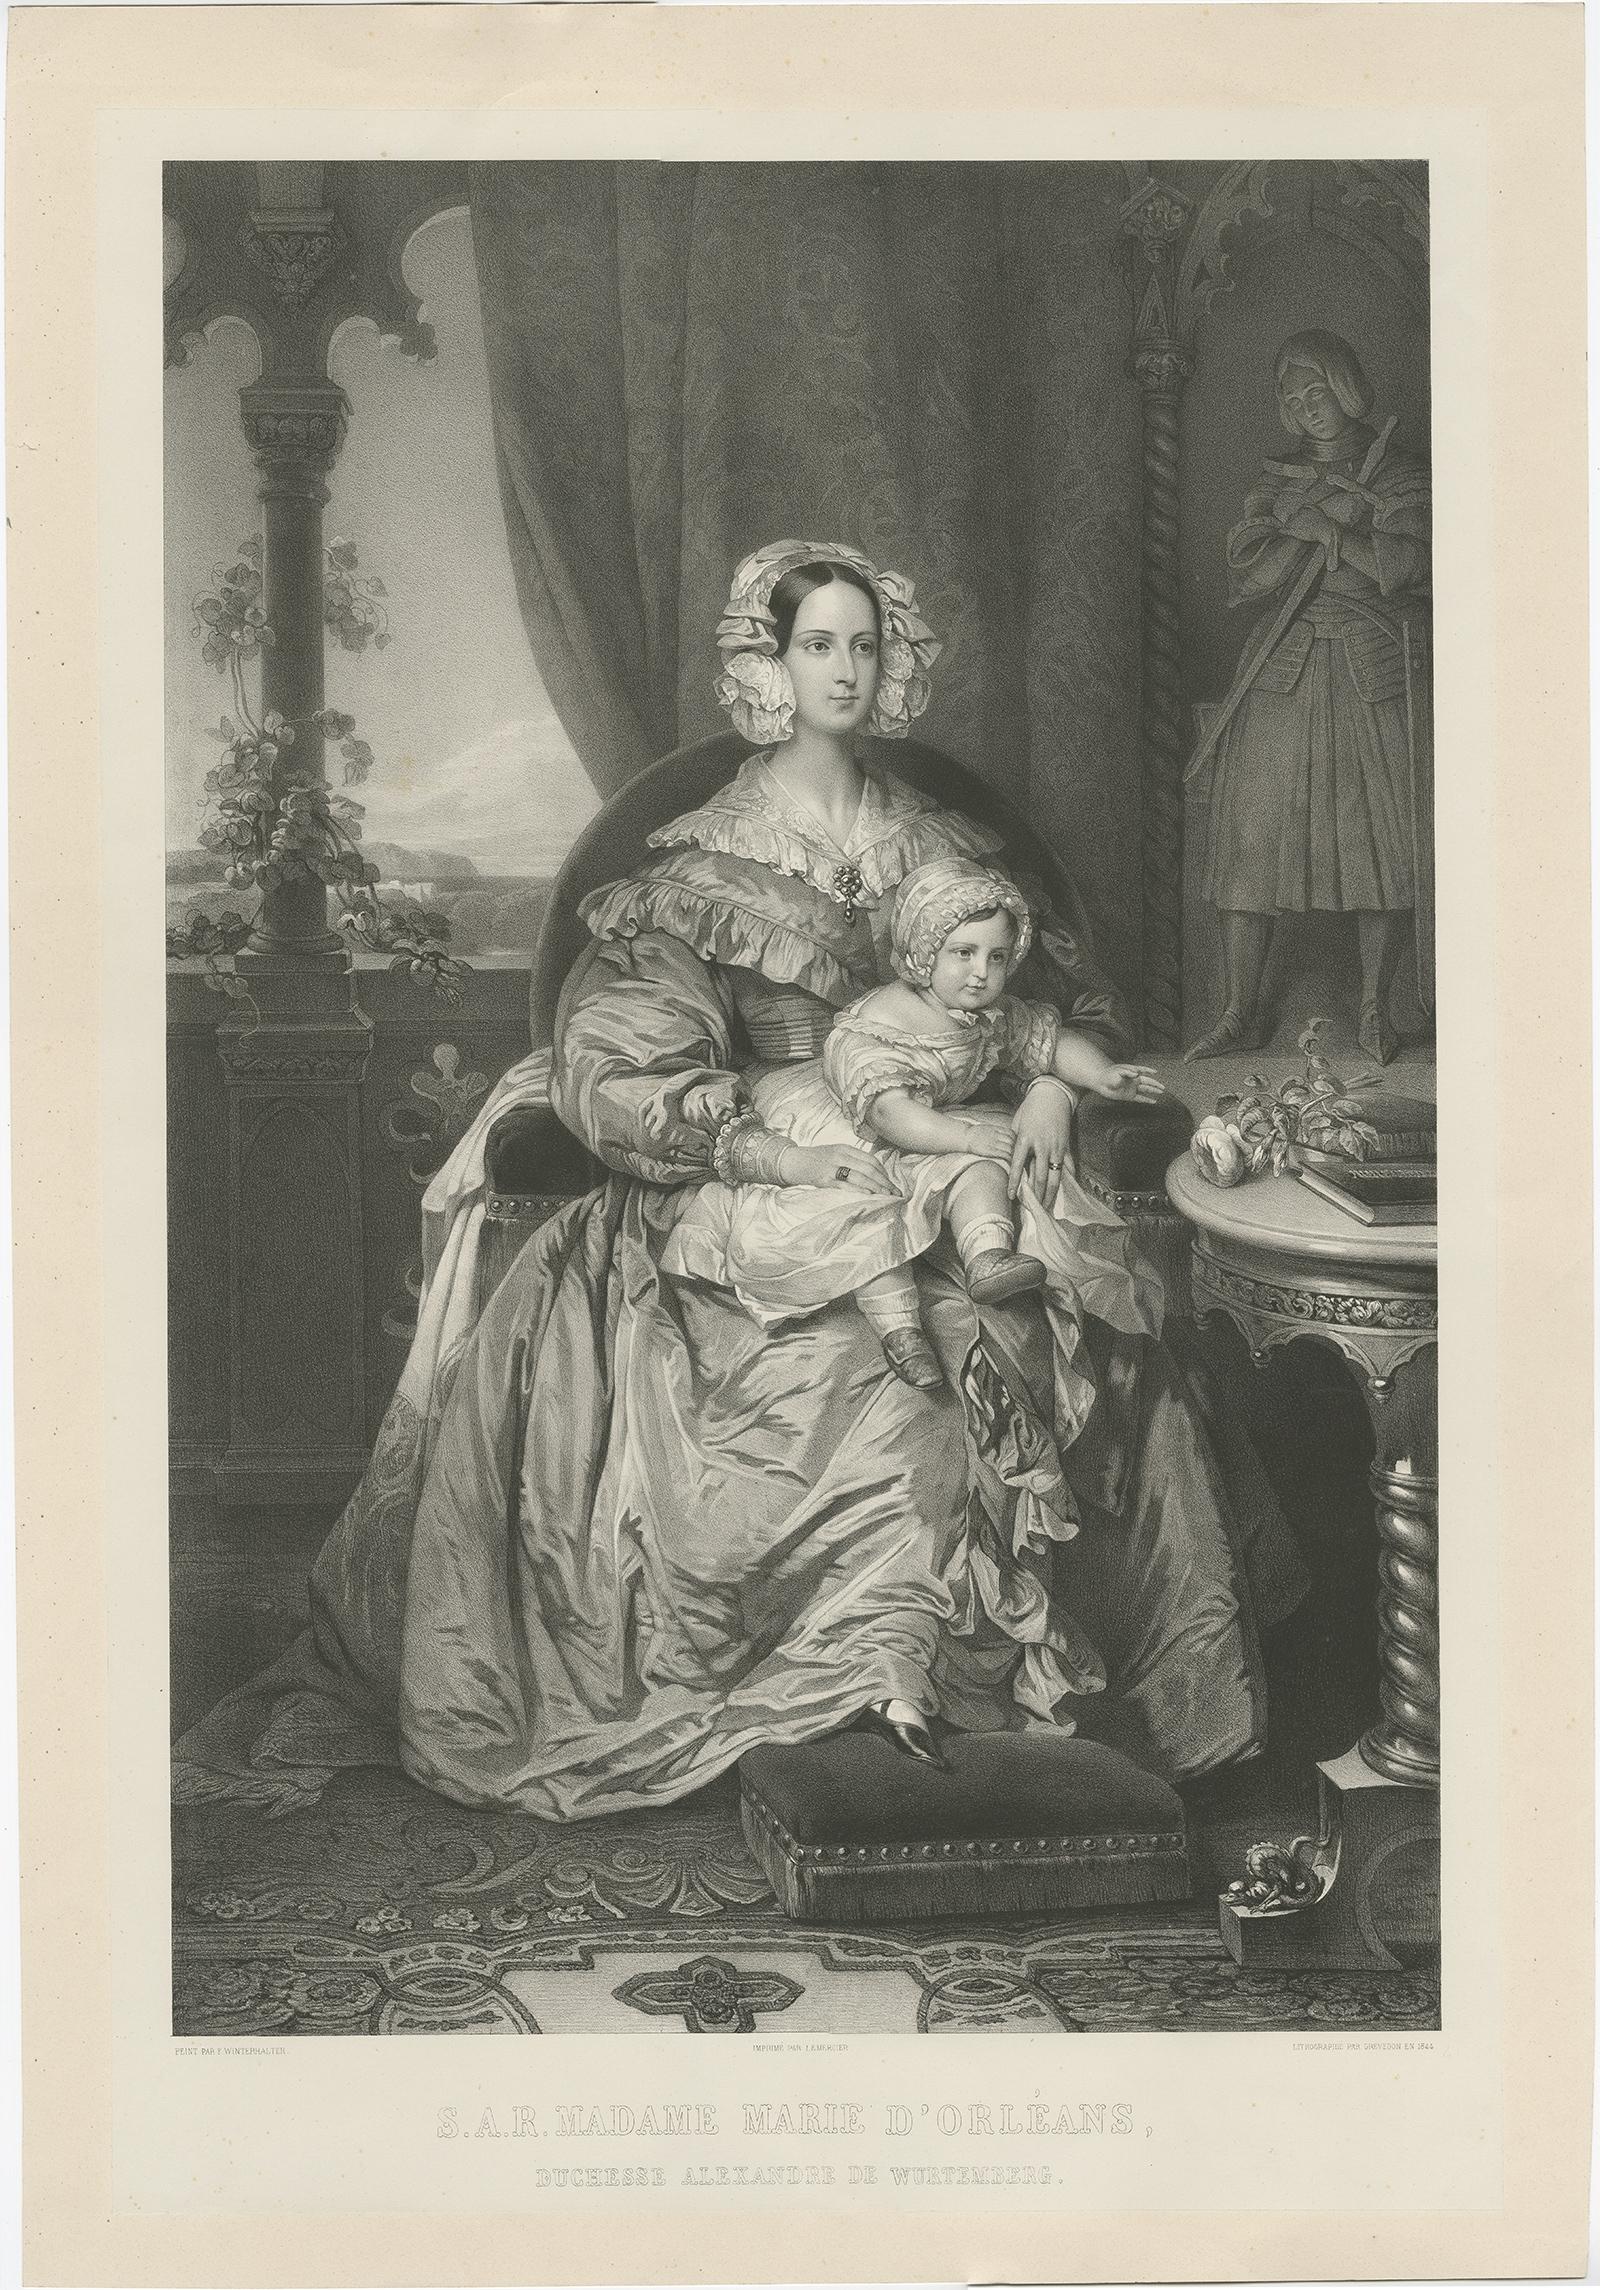 Antique print titled 'S.A.R. Madame Marie d'Orléans, Duchesse Alexandre de Wurtemberg'. 

Large lithograph of Princess Marie of Orleans, Duchess of Württemberg with her son, Philipp, Duke of Württemberg. Whole length figures: the Duchess with